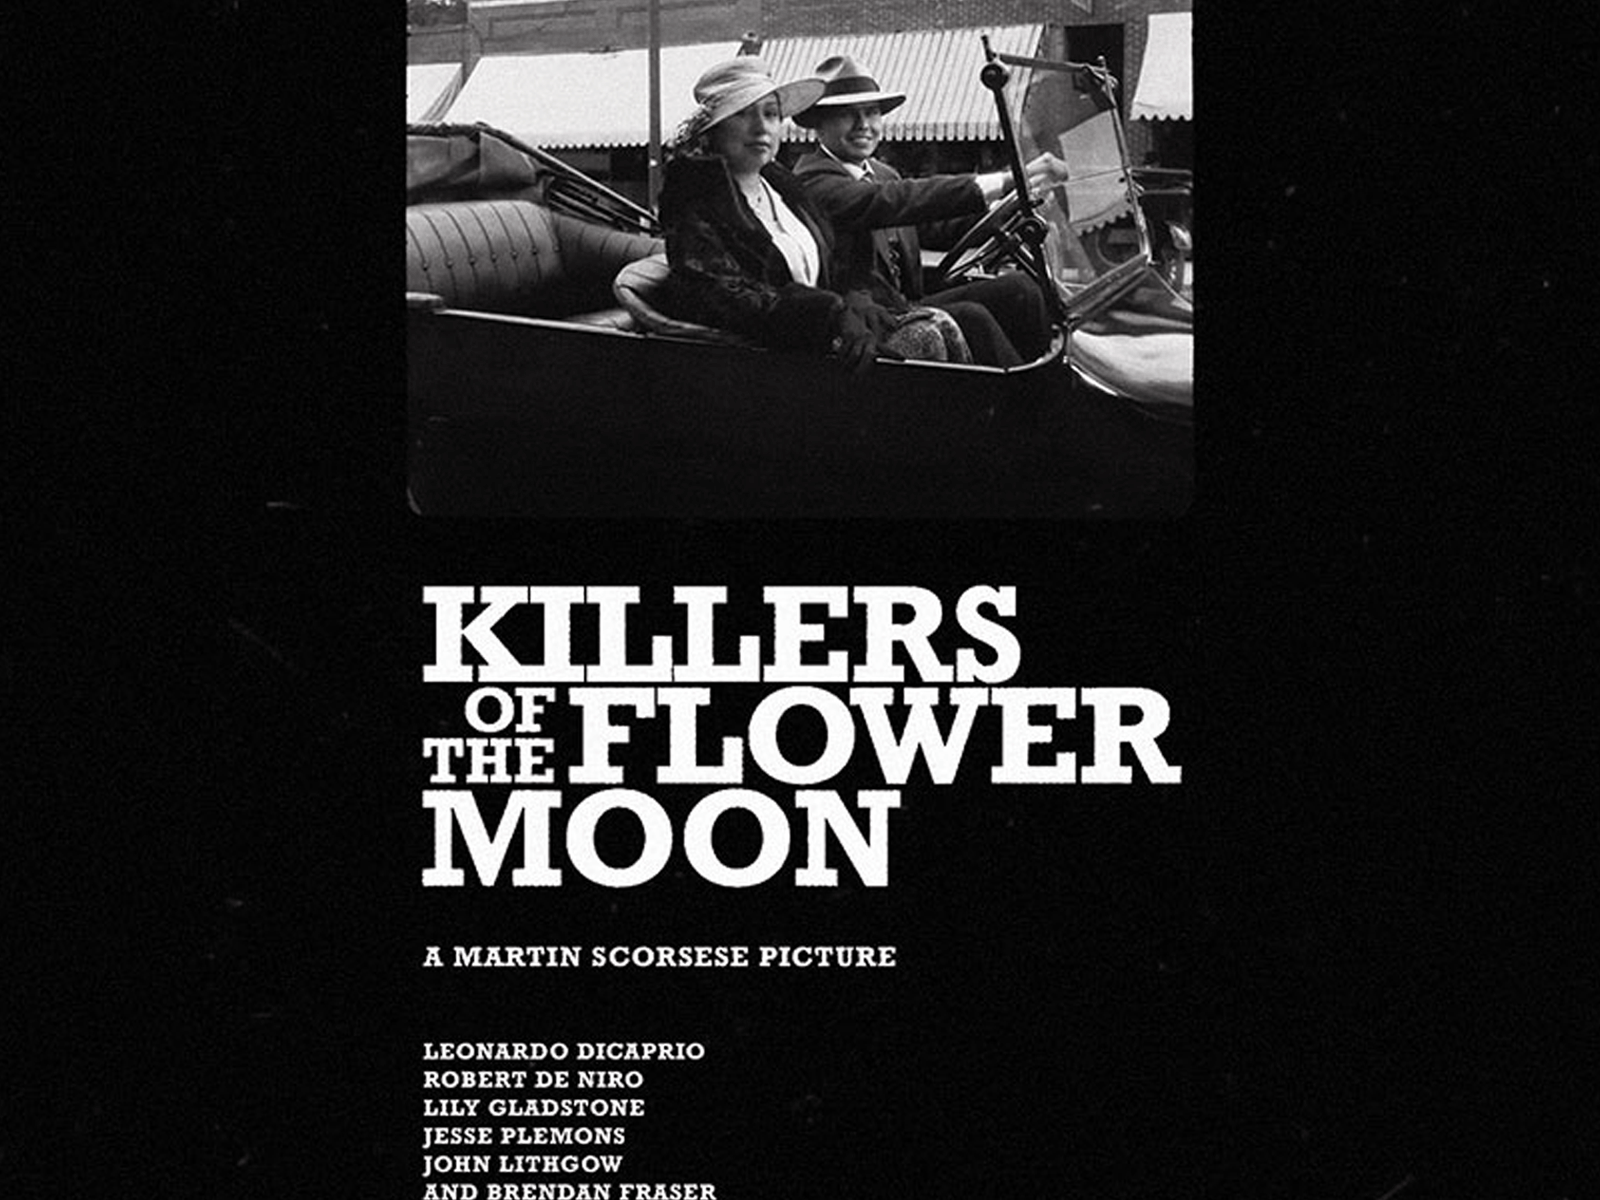 Killers of the Flower Moon animation film poster film posters key art killers of the flower moon martin scorsese movie movie poster movie posters movies poster posters